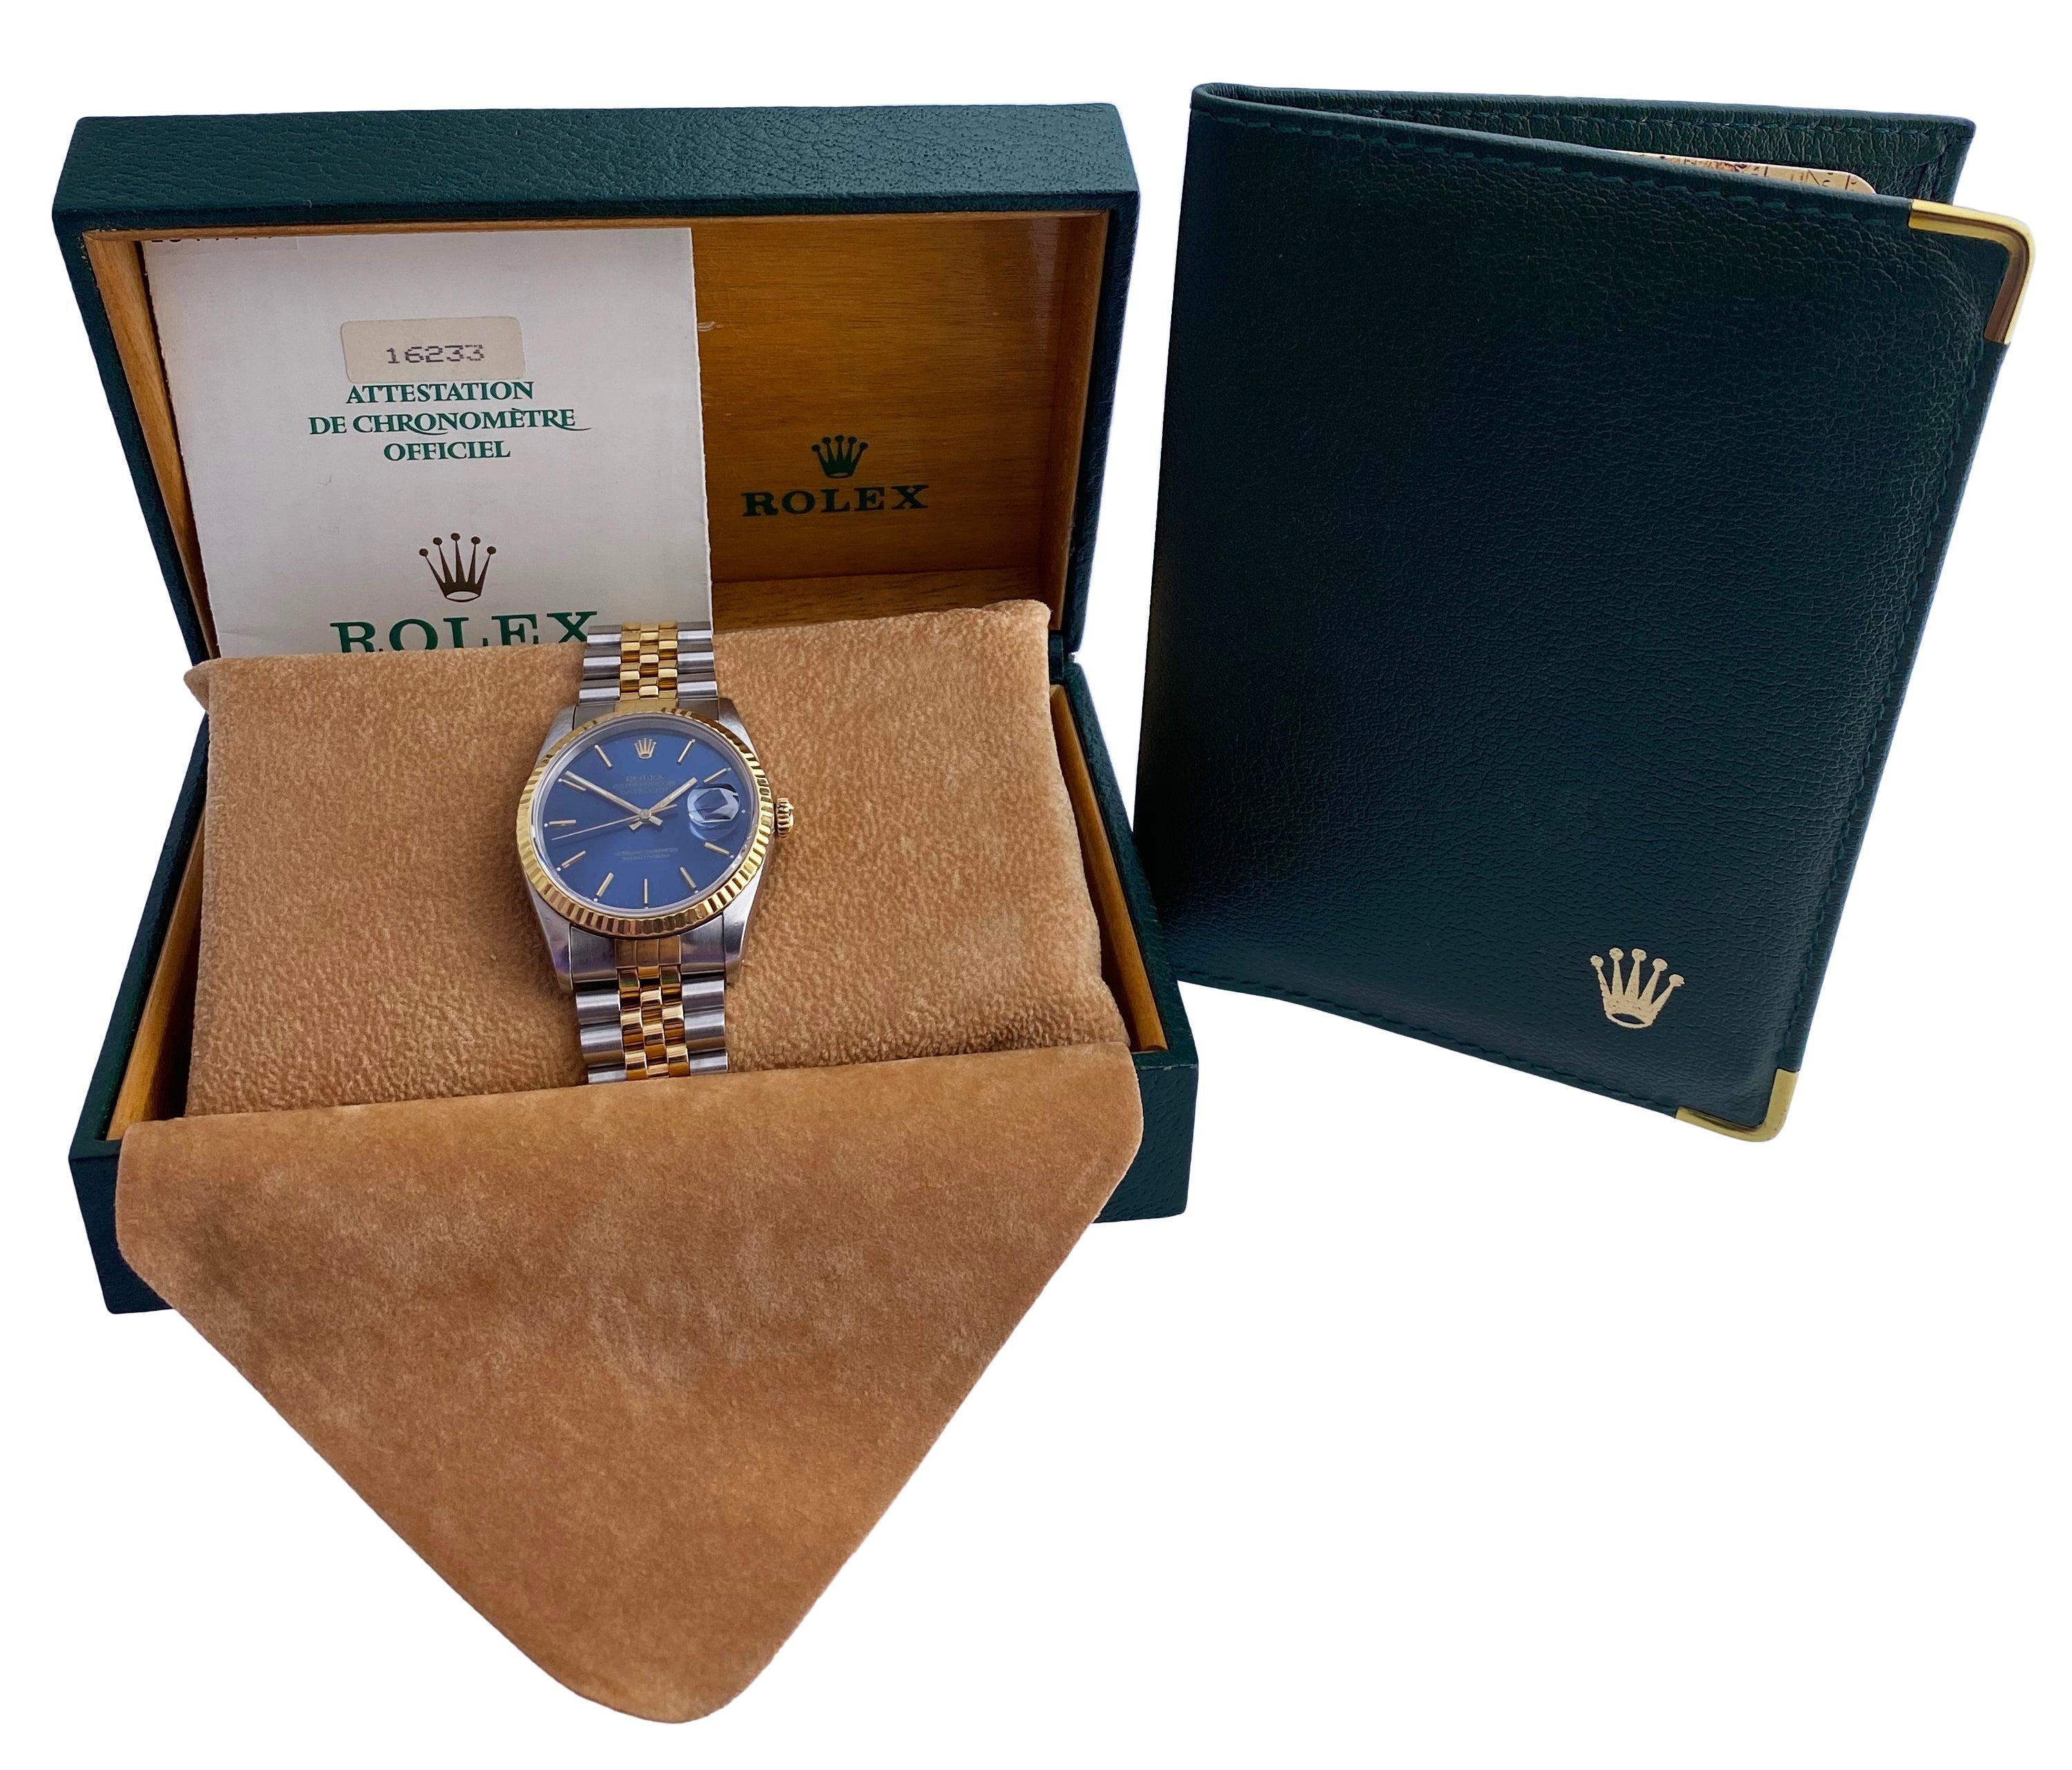 Rolex Oyster Perpetual Datejust 16233 Mens Watch. 36mm stainless steel case with 18K yellow gold fluted bezel. Blue dial with gold hands and gold index hour markers. Minute markers on the outer dial. Date display at the 3 o'clock position. Stainless